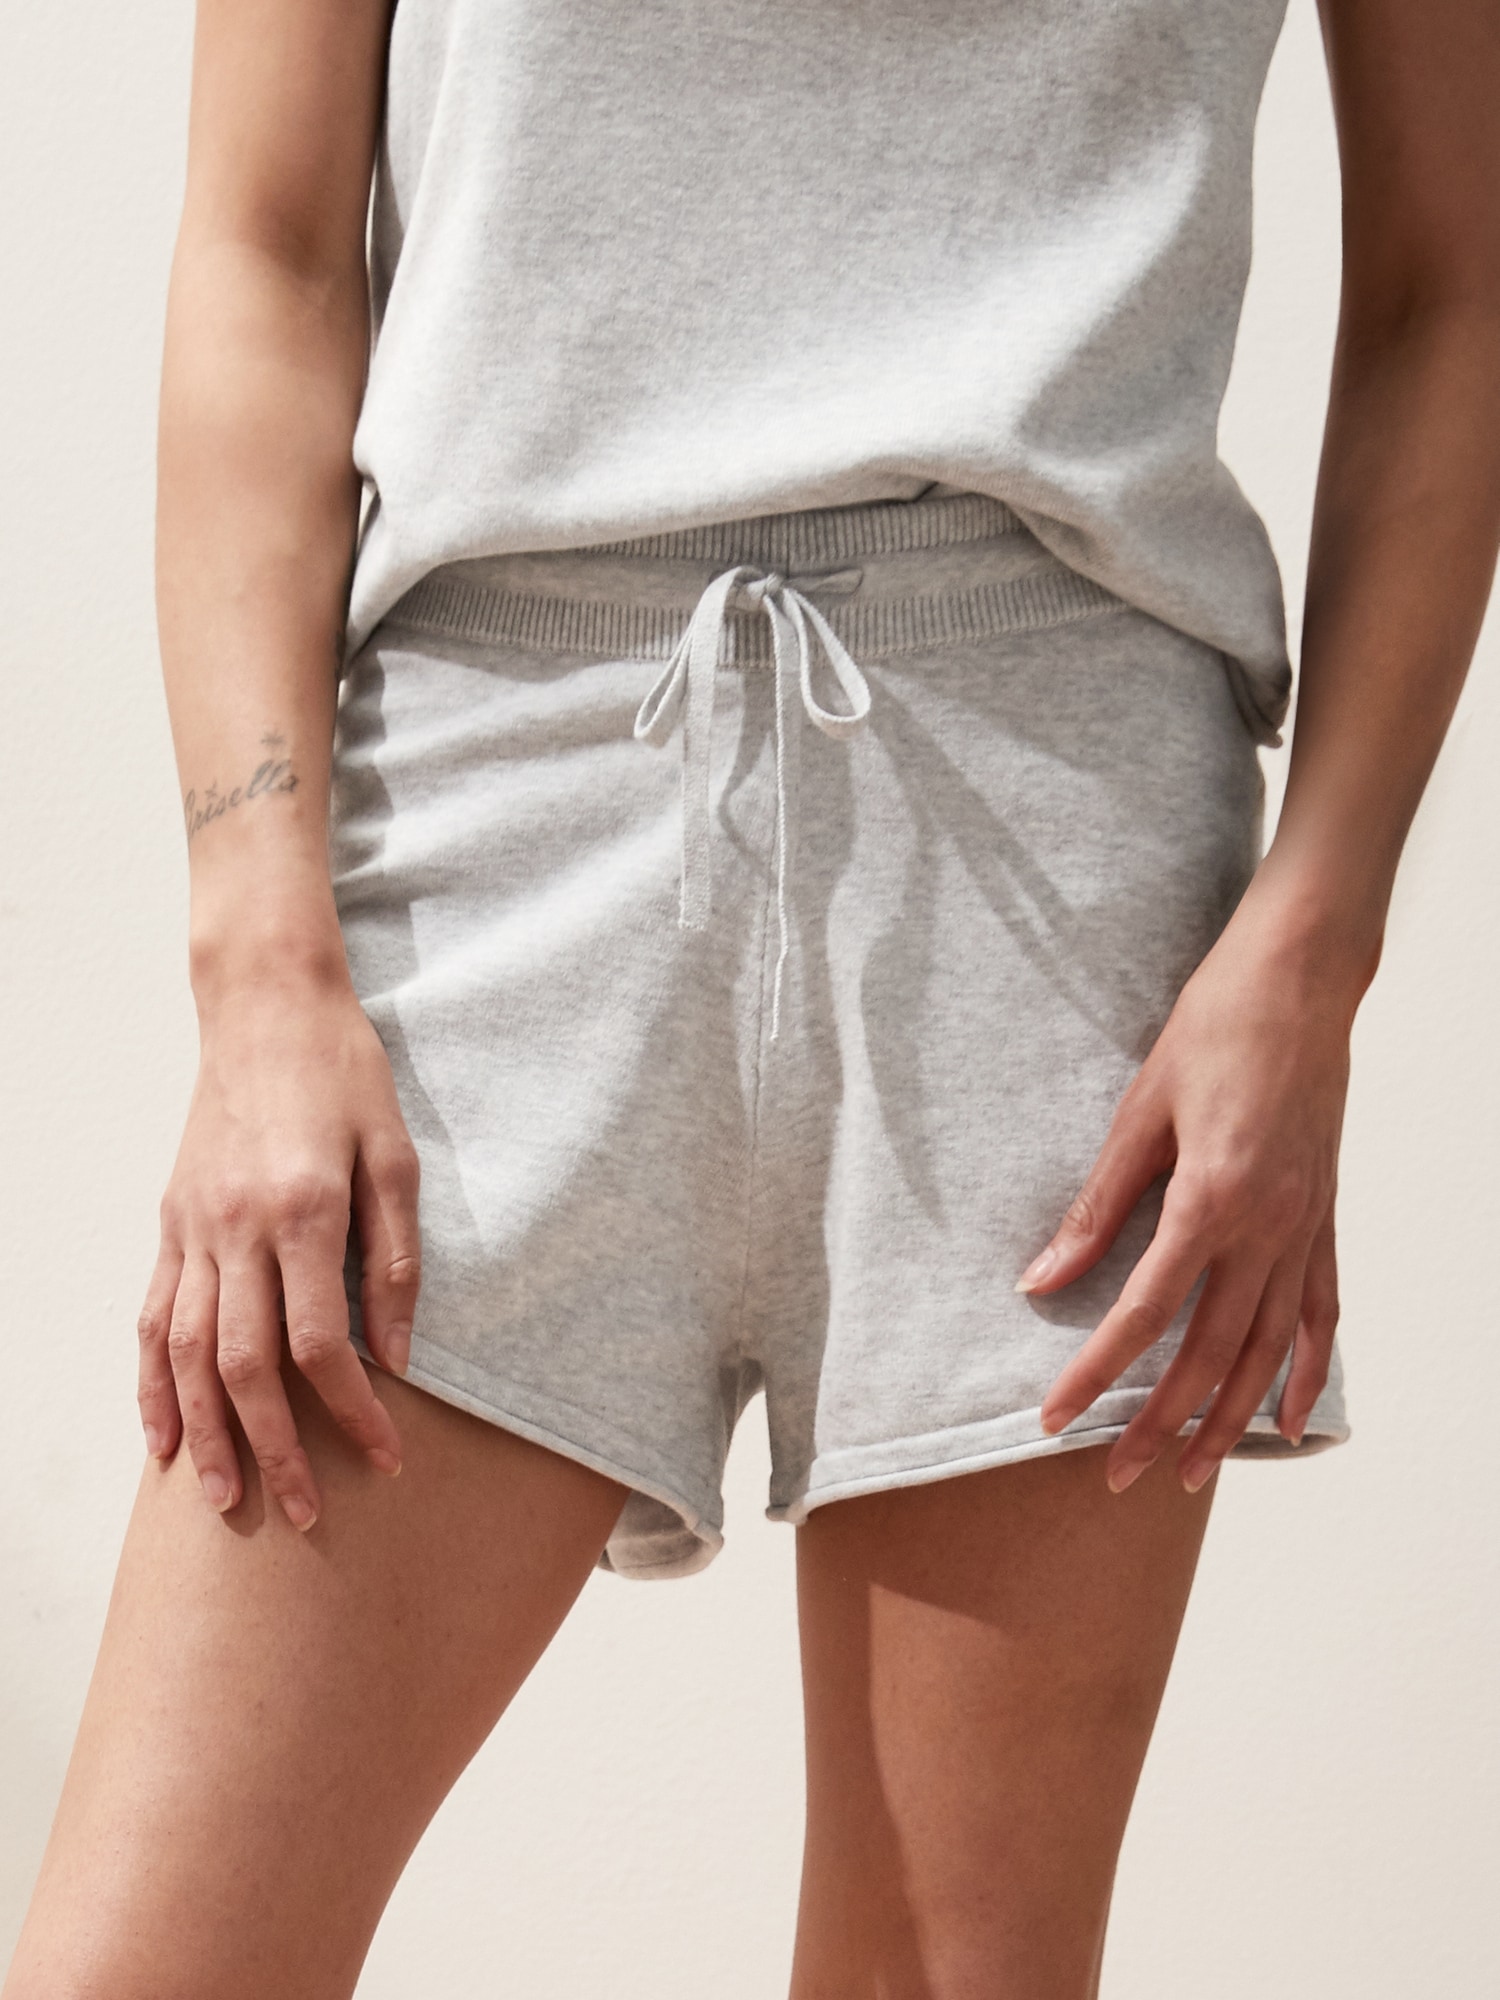 Sweater Pull-On Short - 4 in inseam